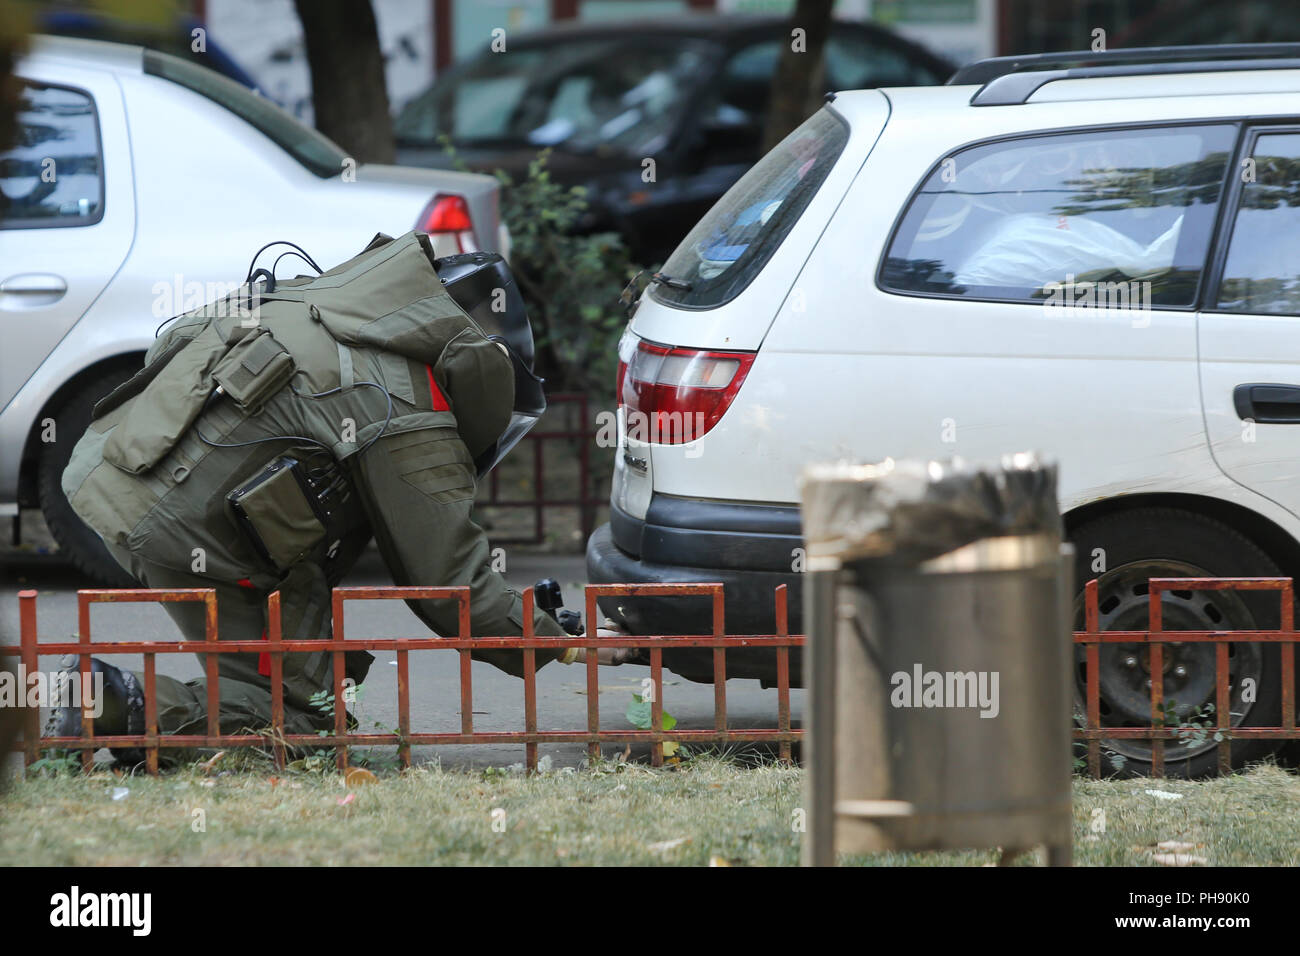 BUCHAREST, ROMANIA - August 31, 2018: Bomb Disposal Expert in Bomb suit for Explosive ordnance disposal (EOD) is verifying a suspect car on a street i Stock Photo